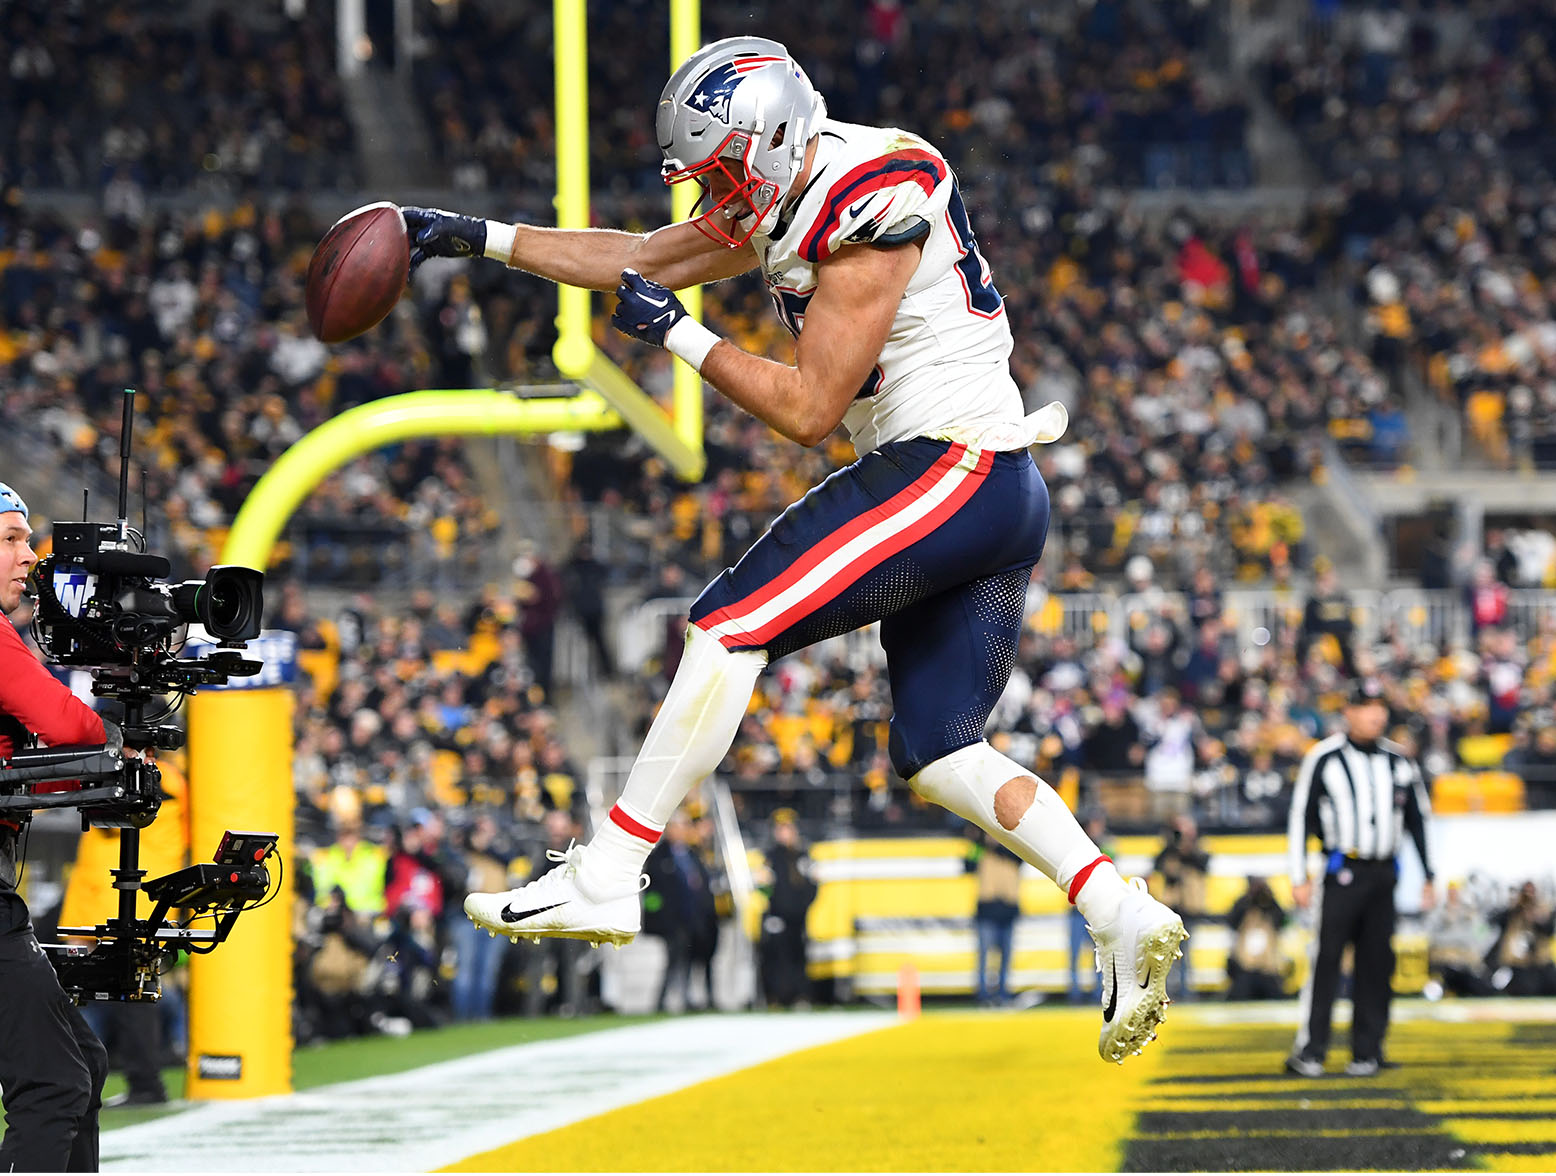 PITTSBURGH, PENNSYLVANIA - DECEMBER 07: Tight end Hunter Henry (85) of the New England Patriots celebrates after a touchdown reception in the second quarter against the Pittsburgh Steelers at Acrisure Stadium on December 07, 2023 in Pittsburgh, Pennsylvania. (Photo by Joe Sargent/Getty Images)